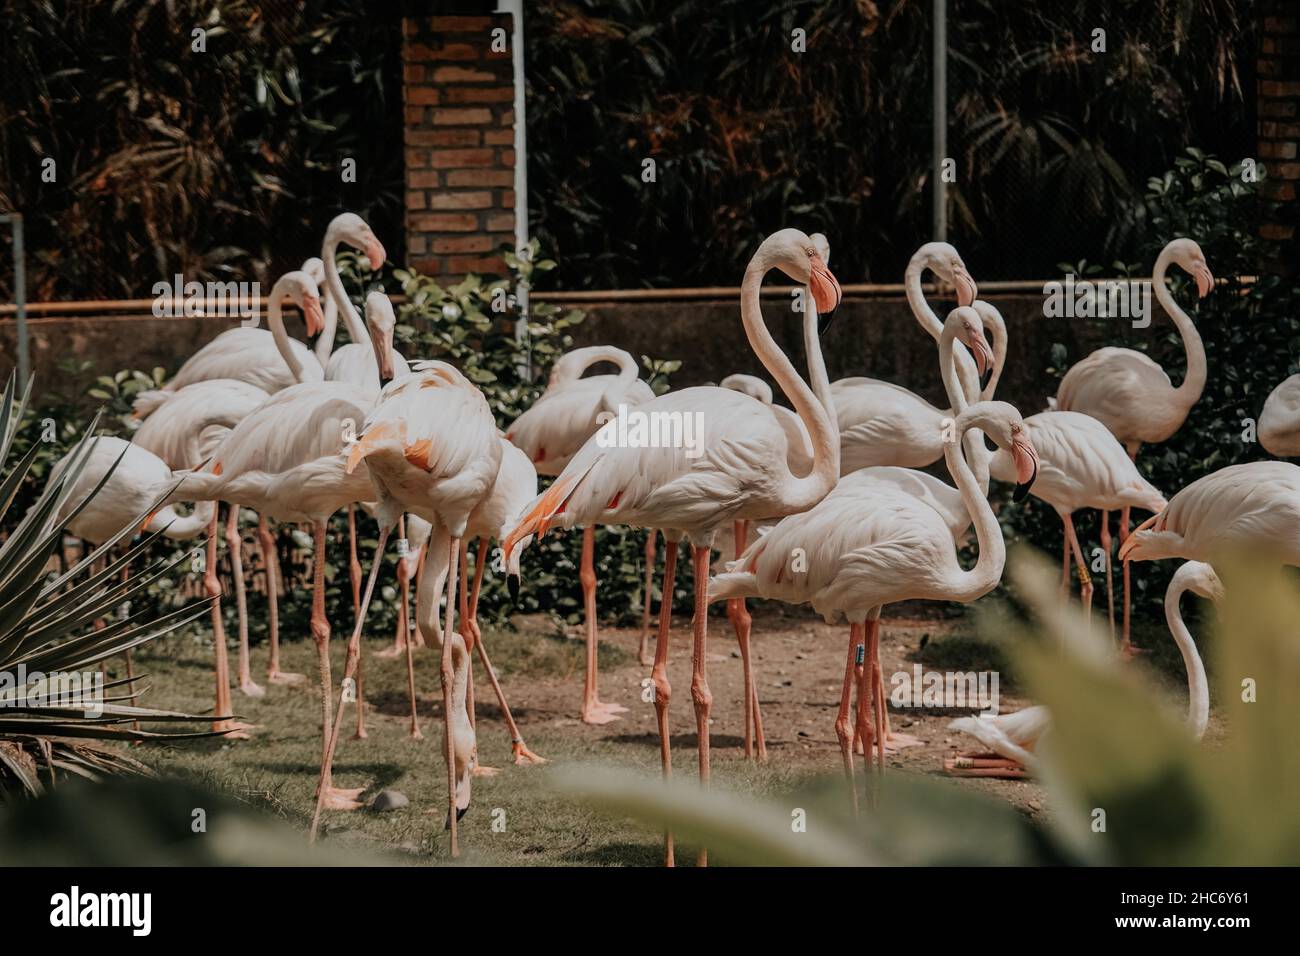 Daylight shot of a lot of flamingos in the garden Stock Photo